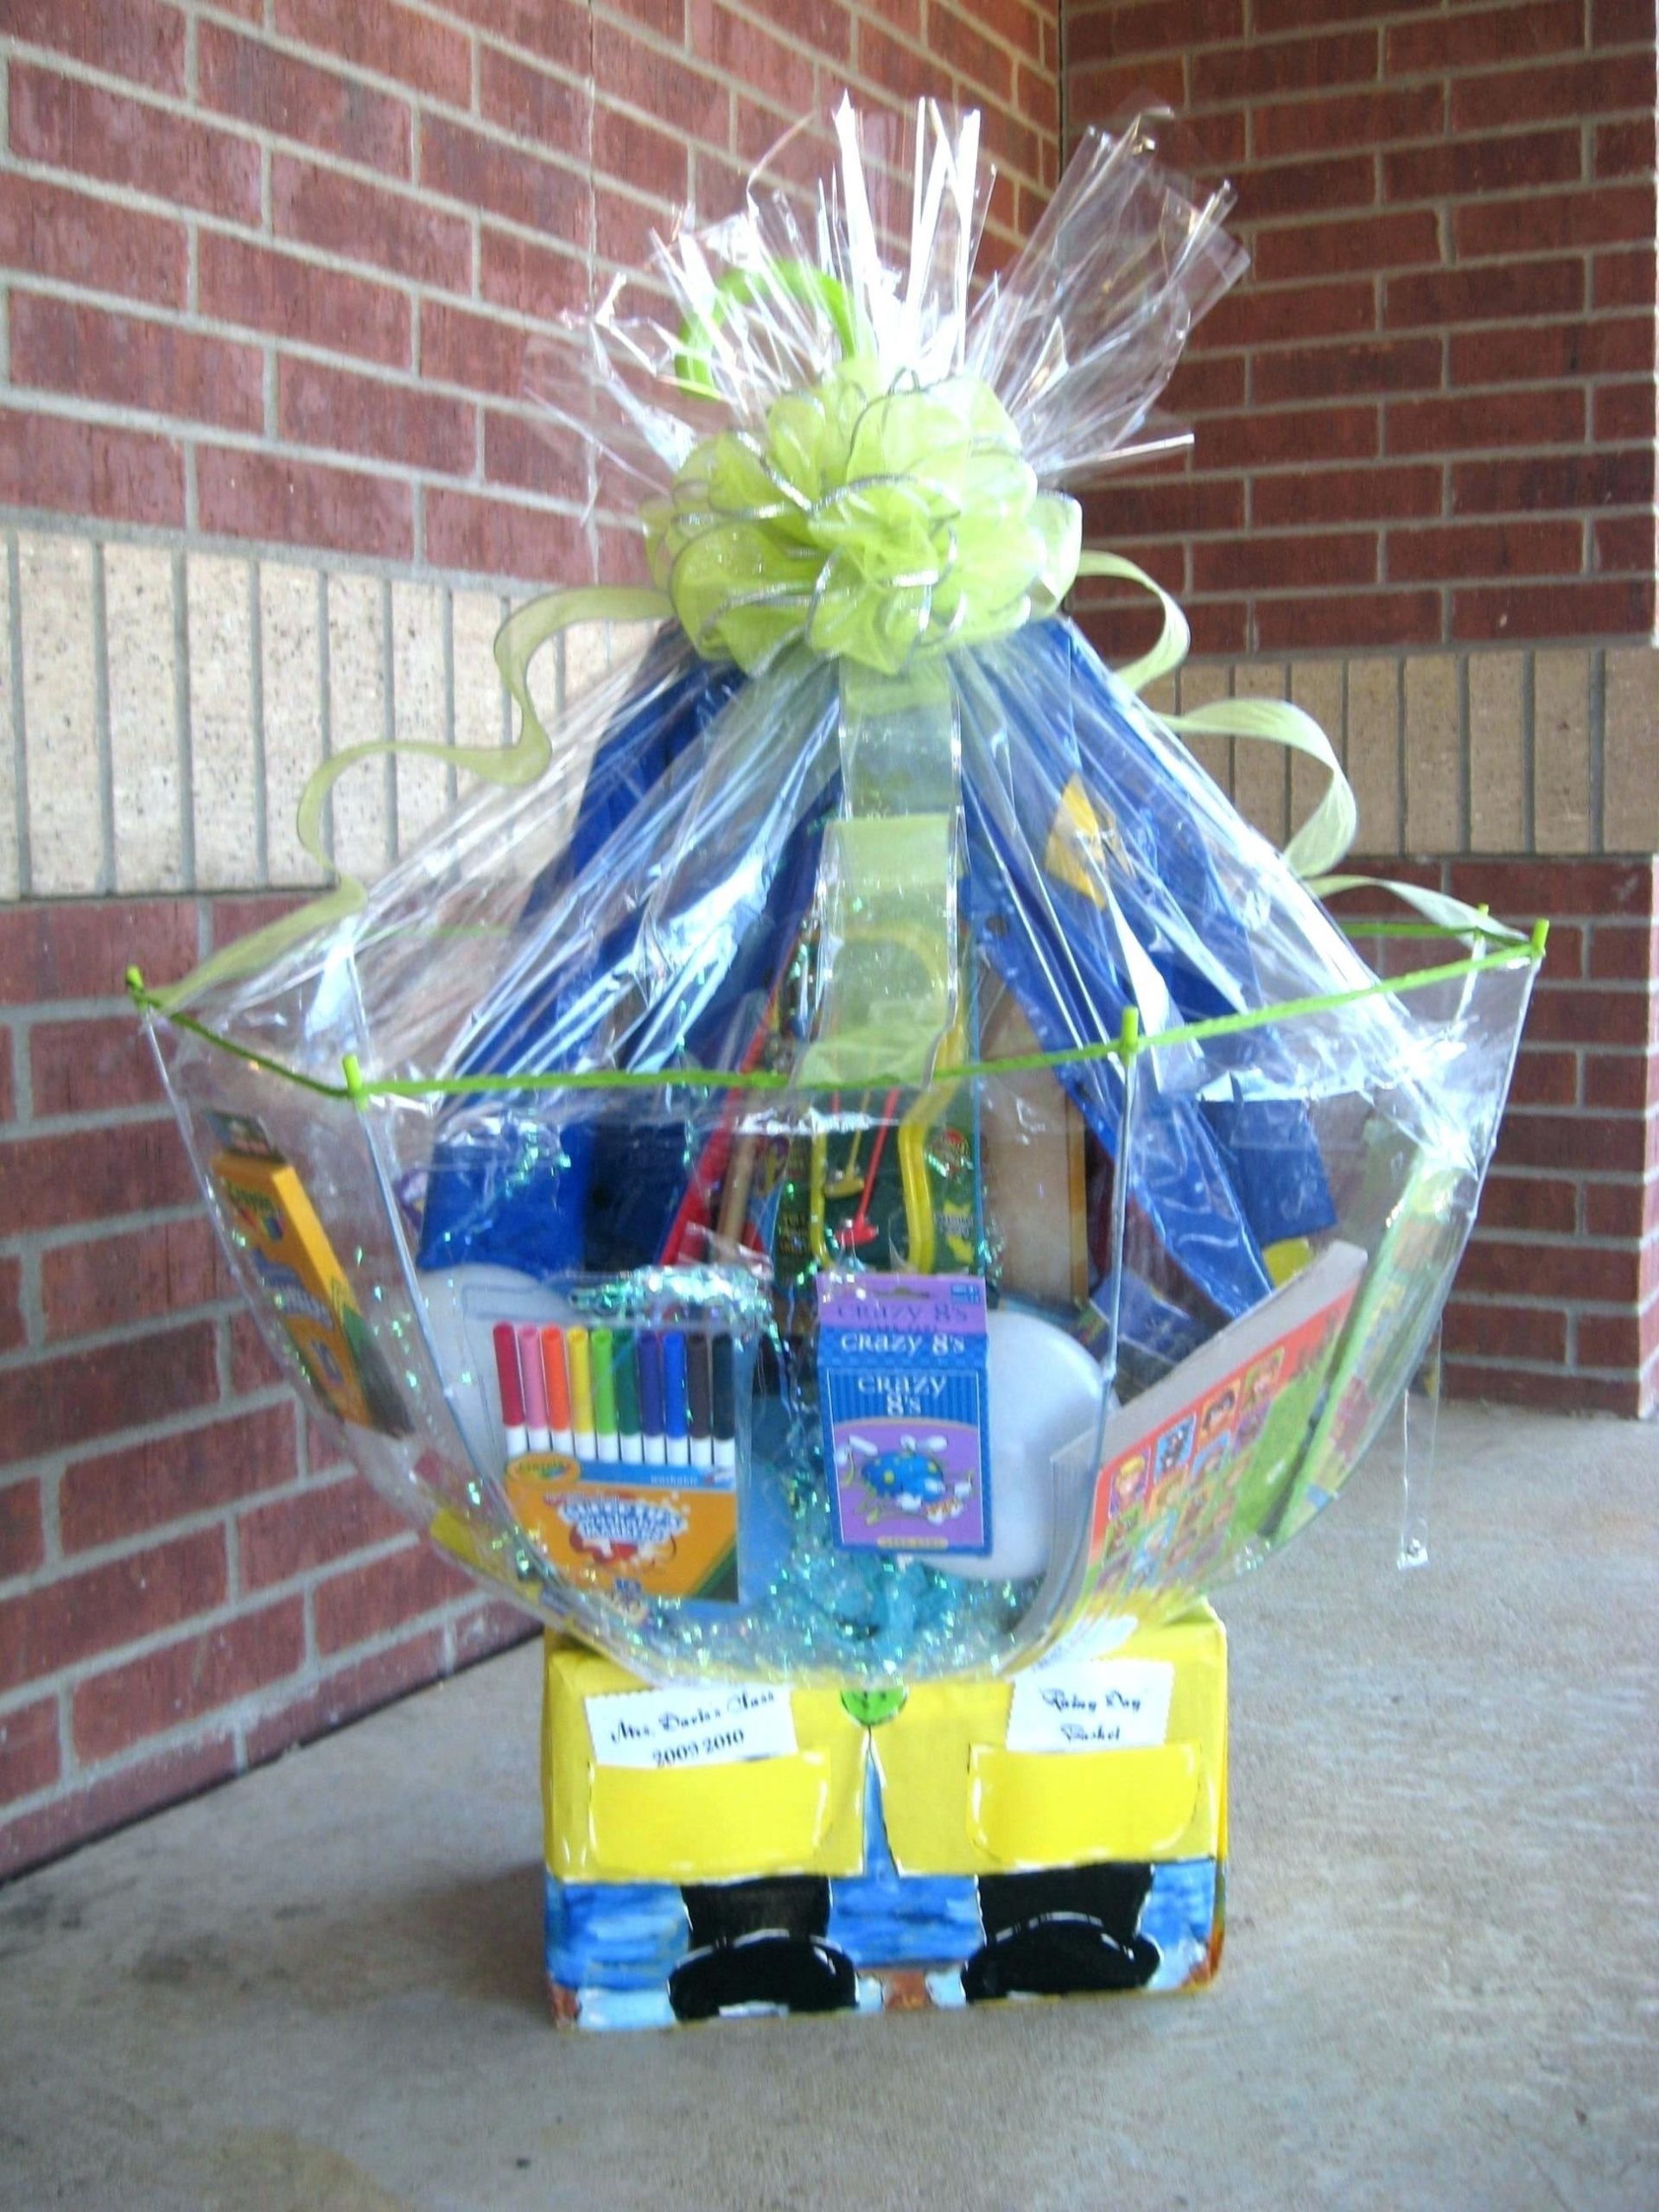 Ideas For Gift Baskets To Auction
 10 Cute Silent Auction Gift Basket Ideas 2019